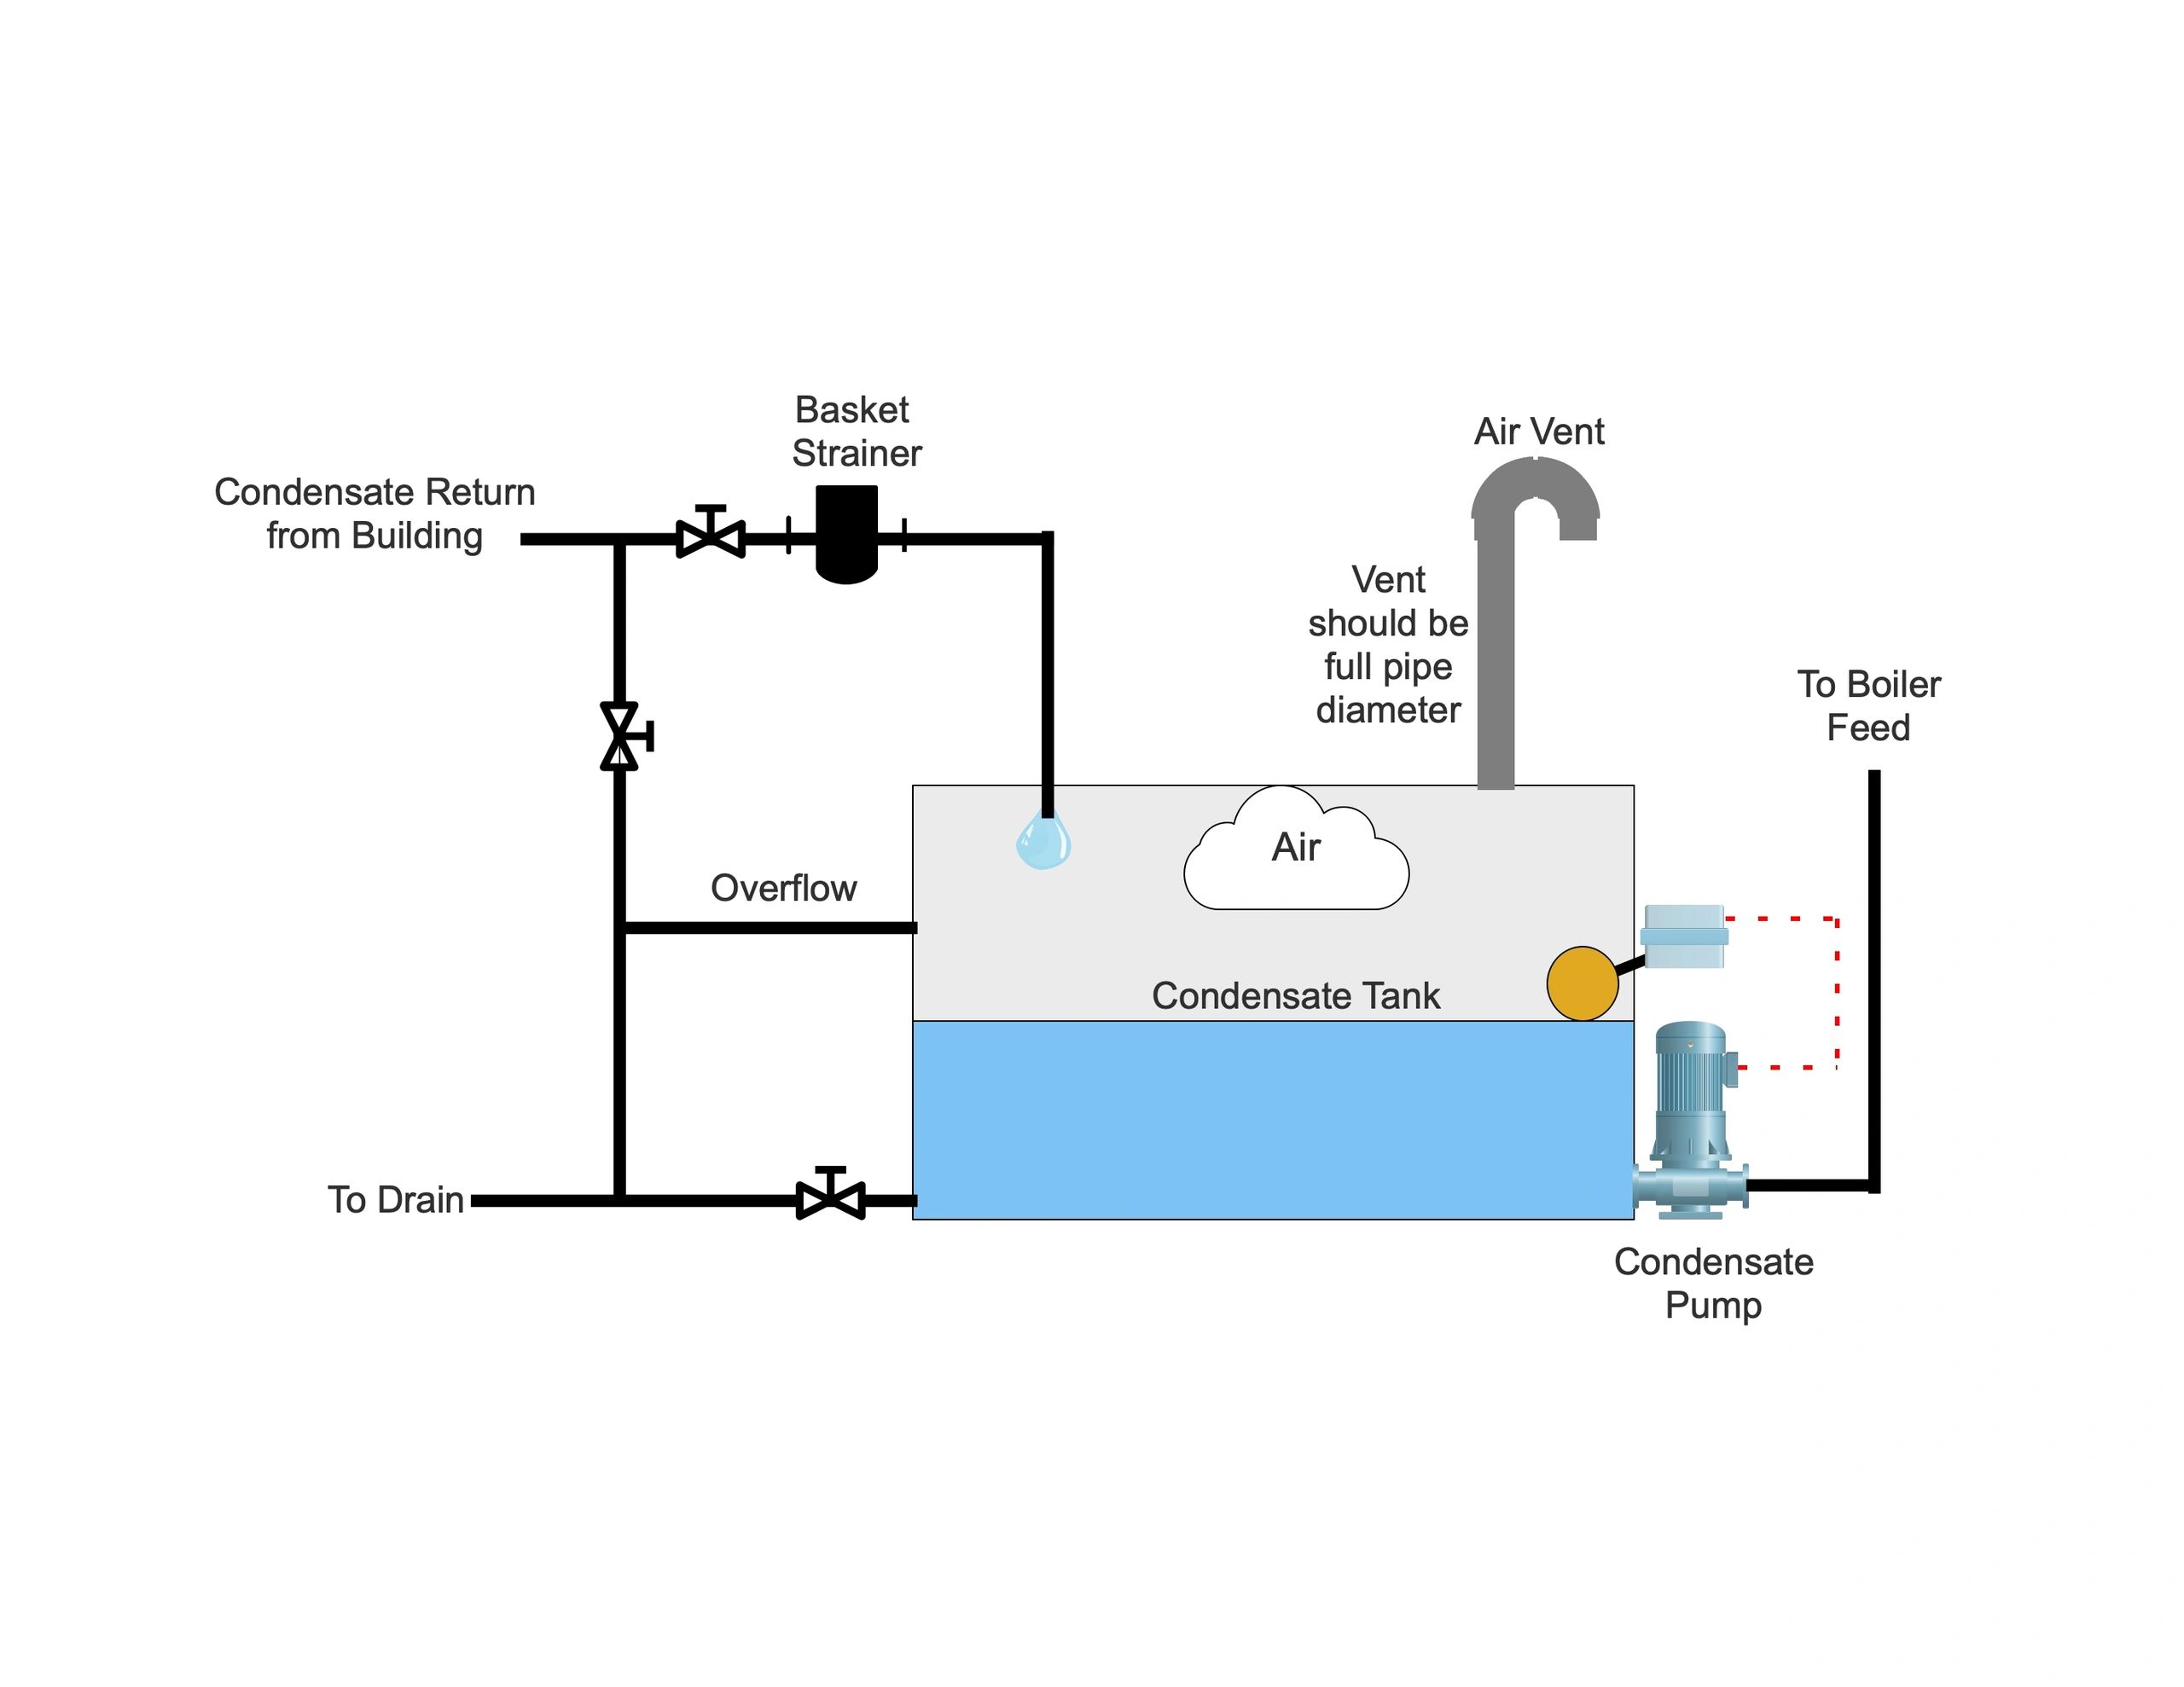 What does a condensate tank do?